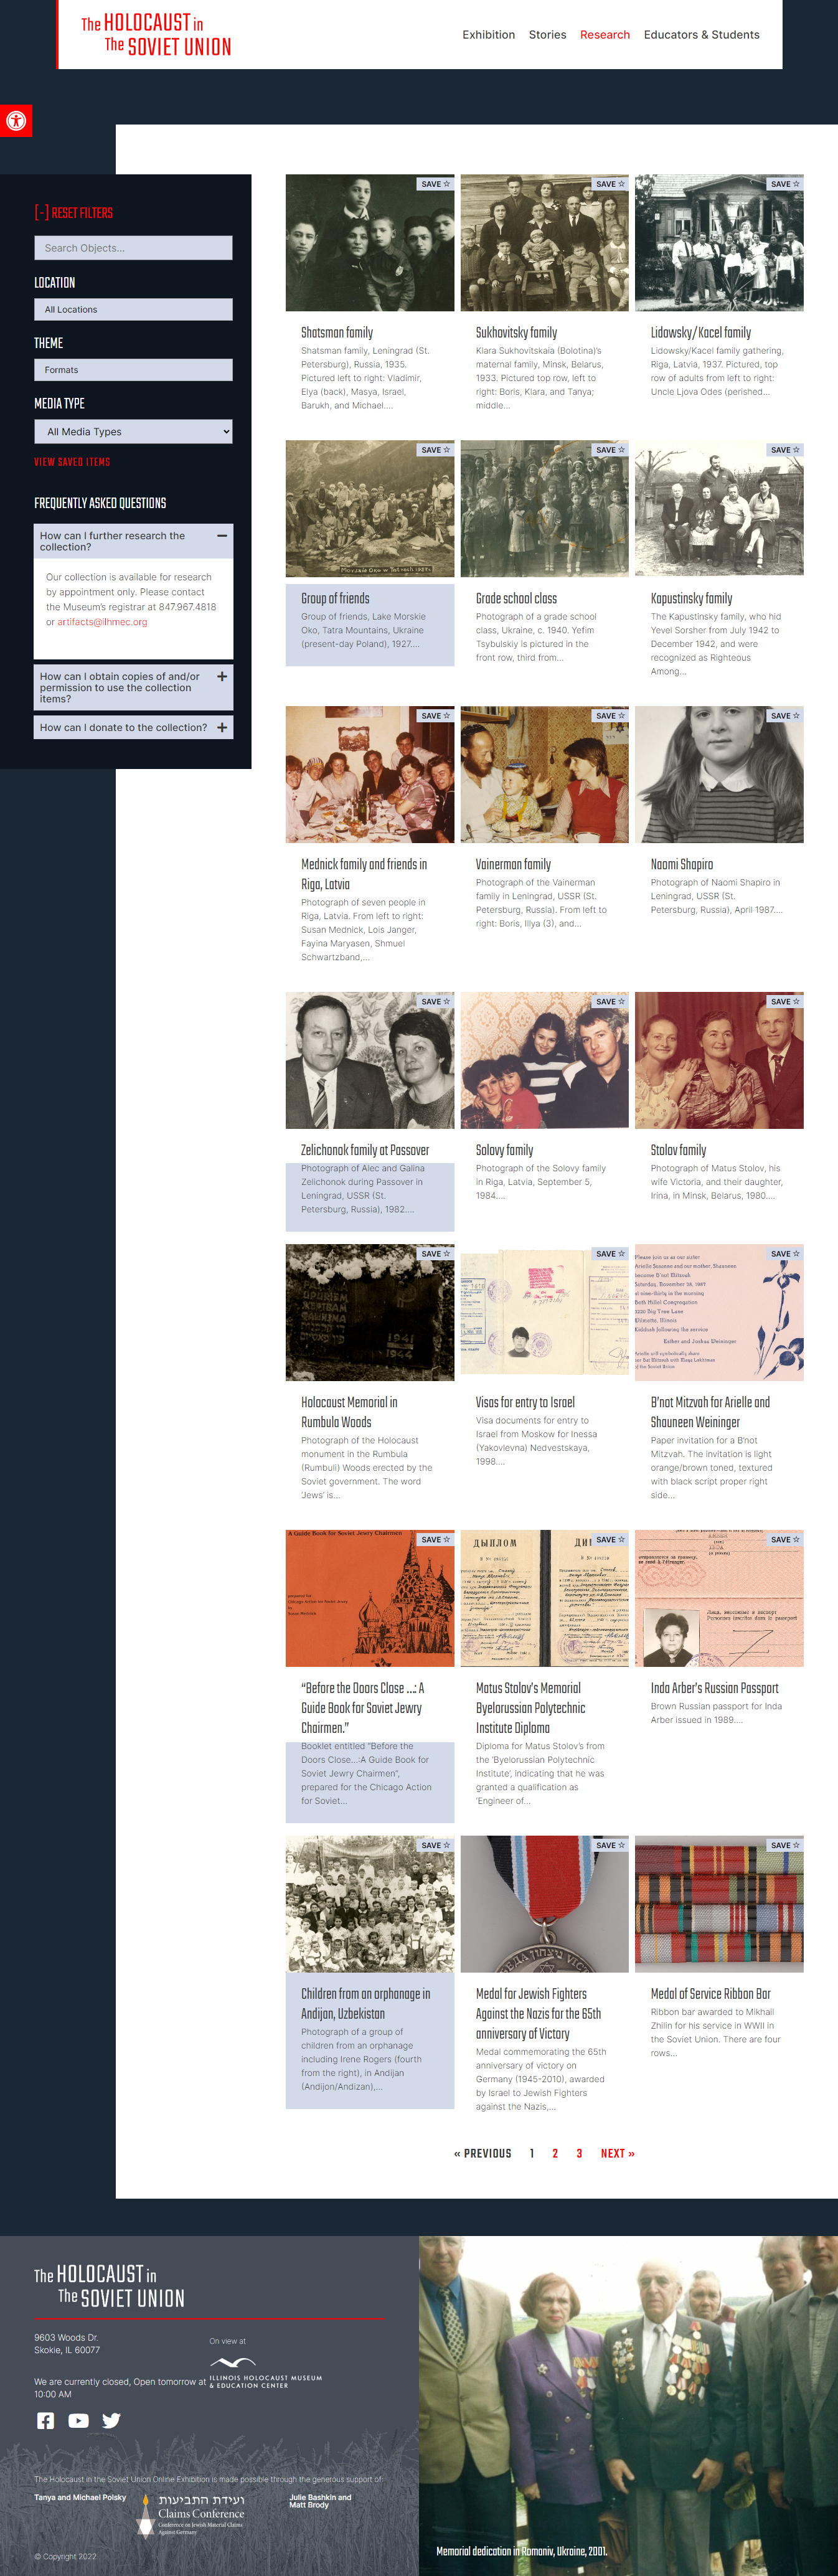 Holocaust in the Soviet Union Exhibition Research Page